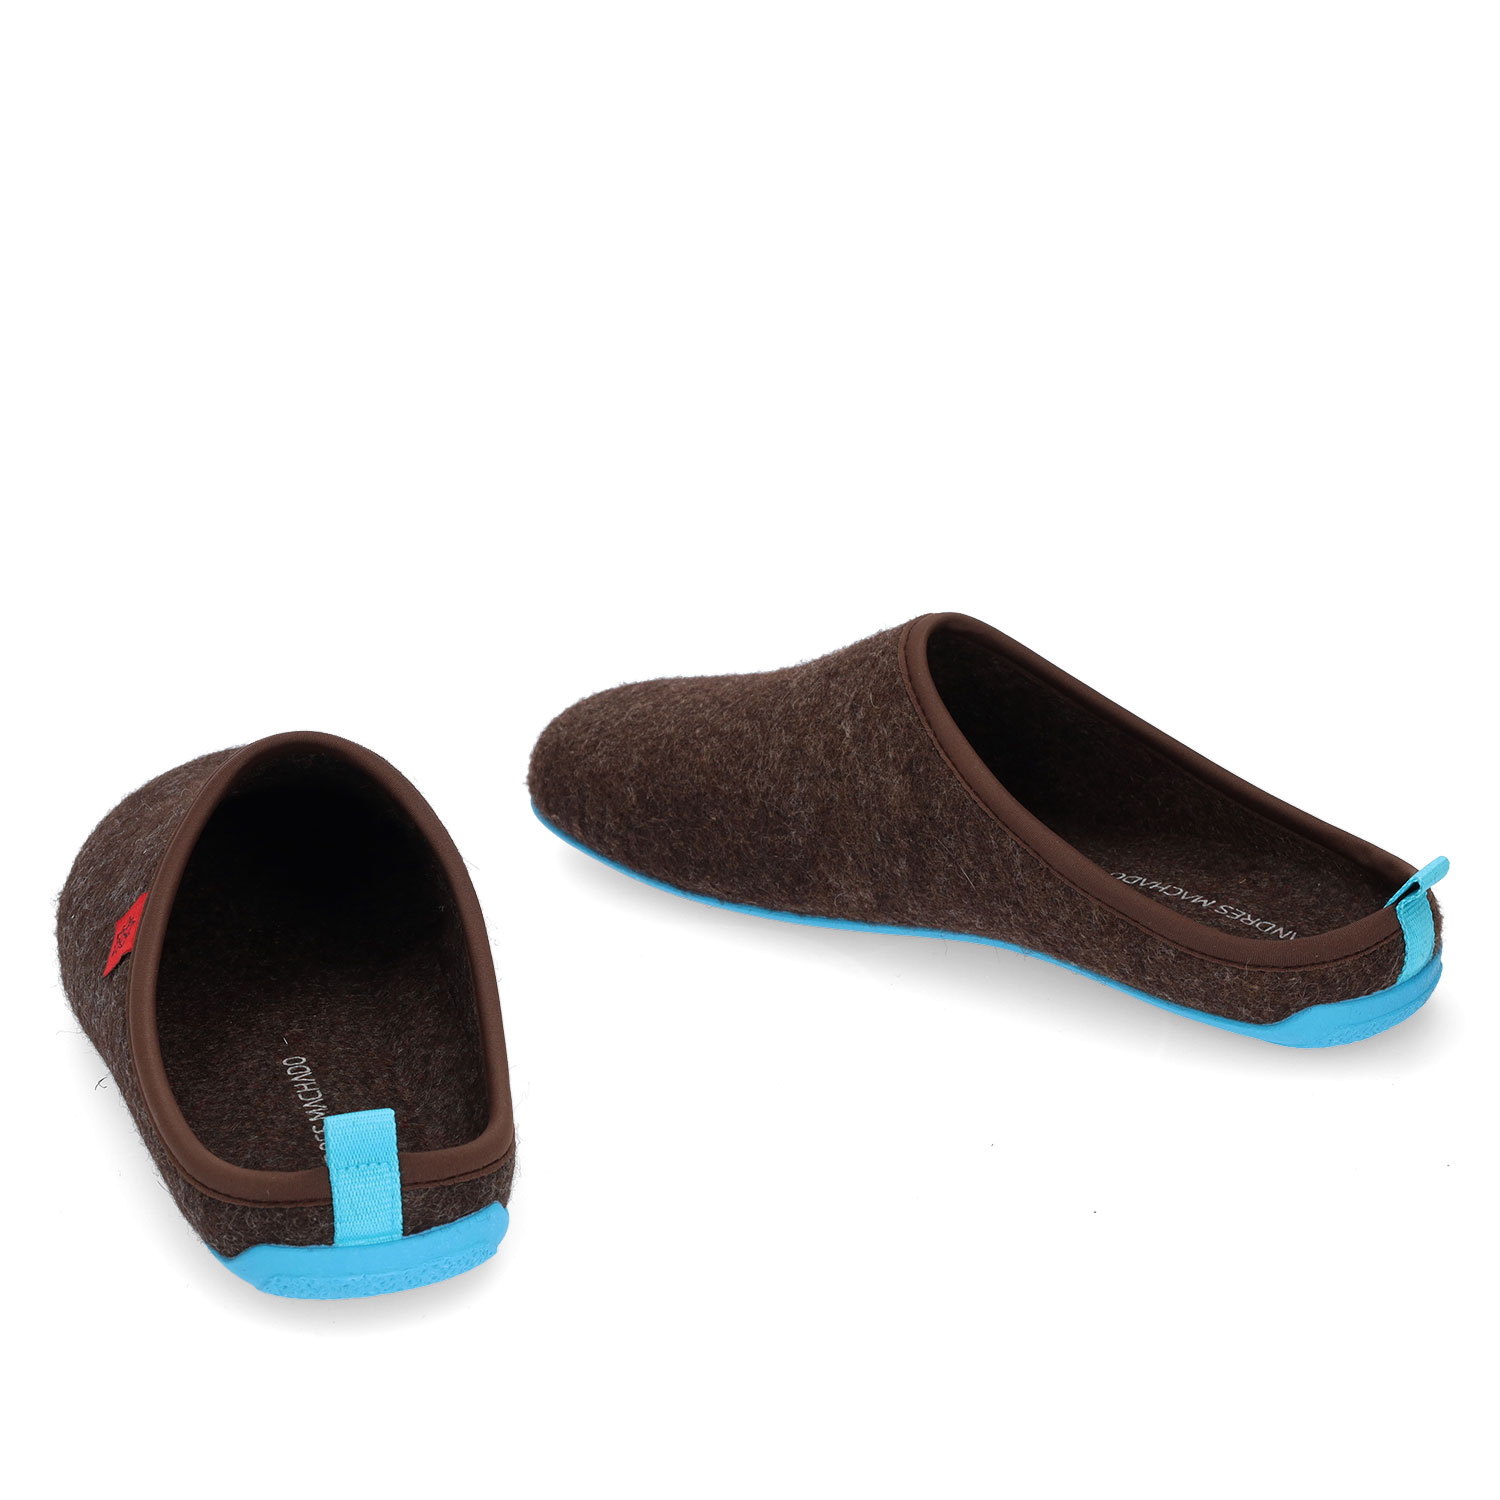 Unisex Brown Felt Slippers with Blue sole 